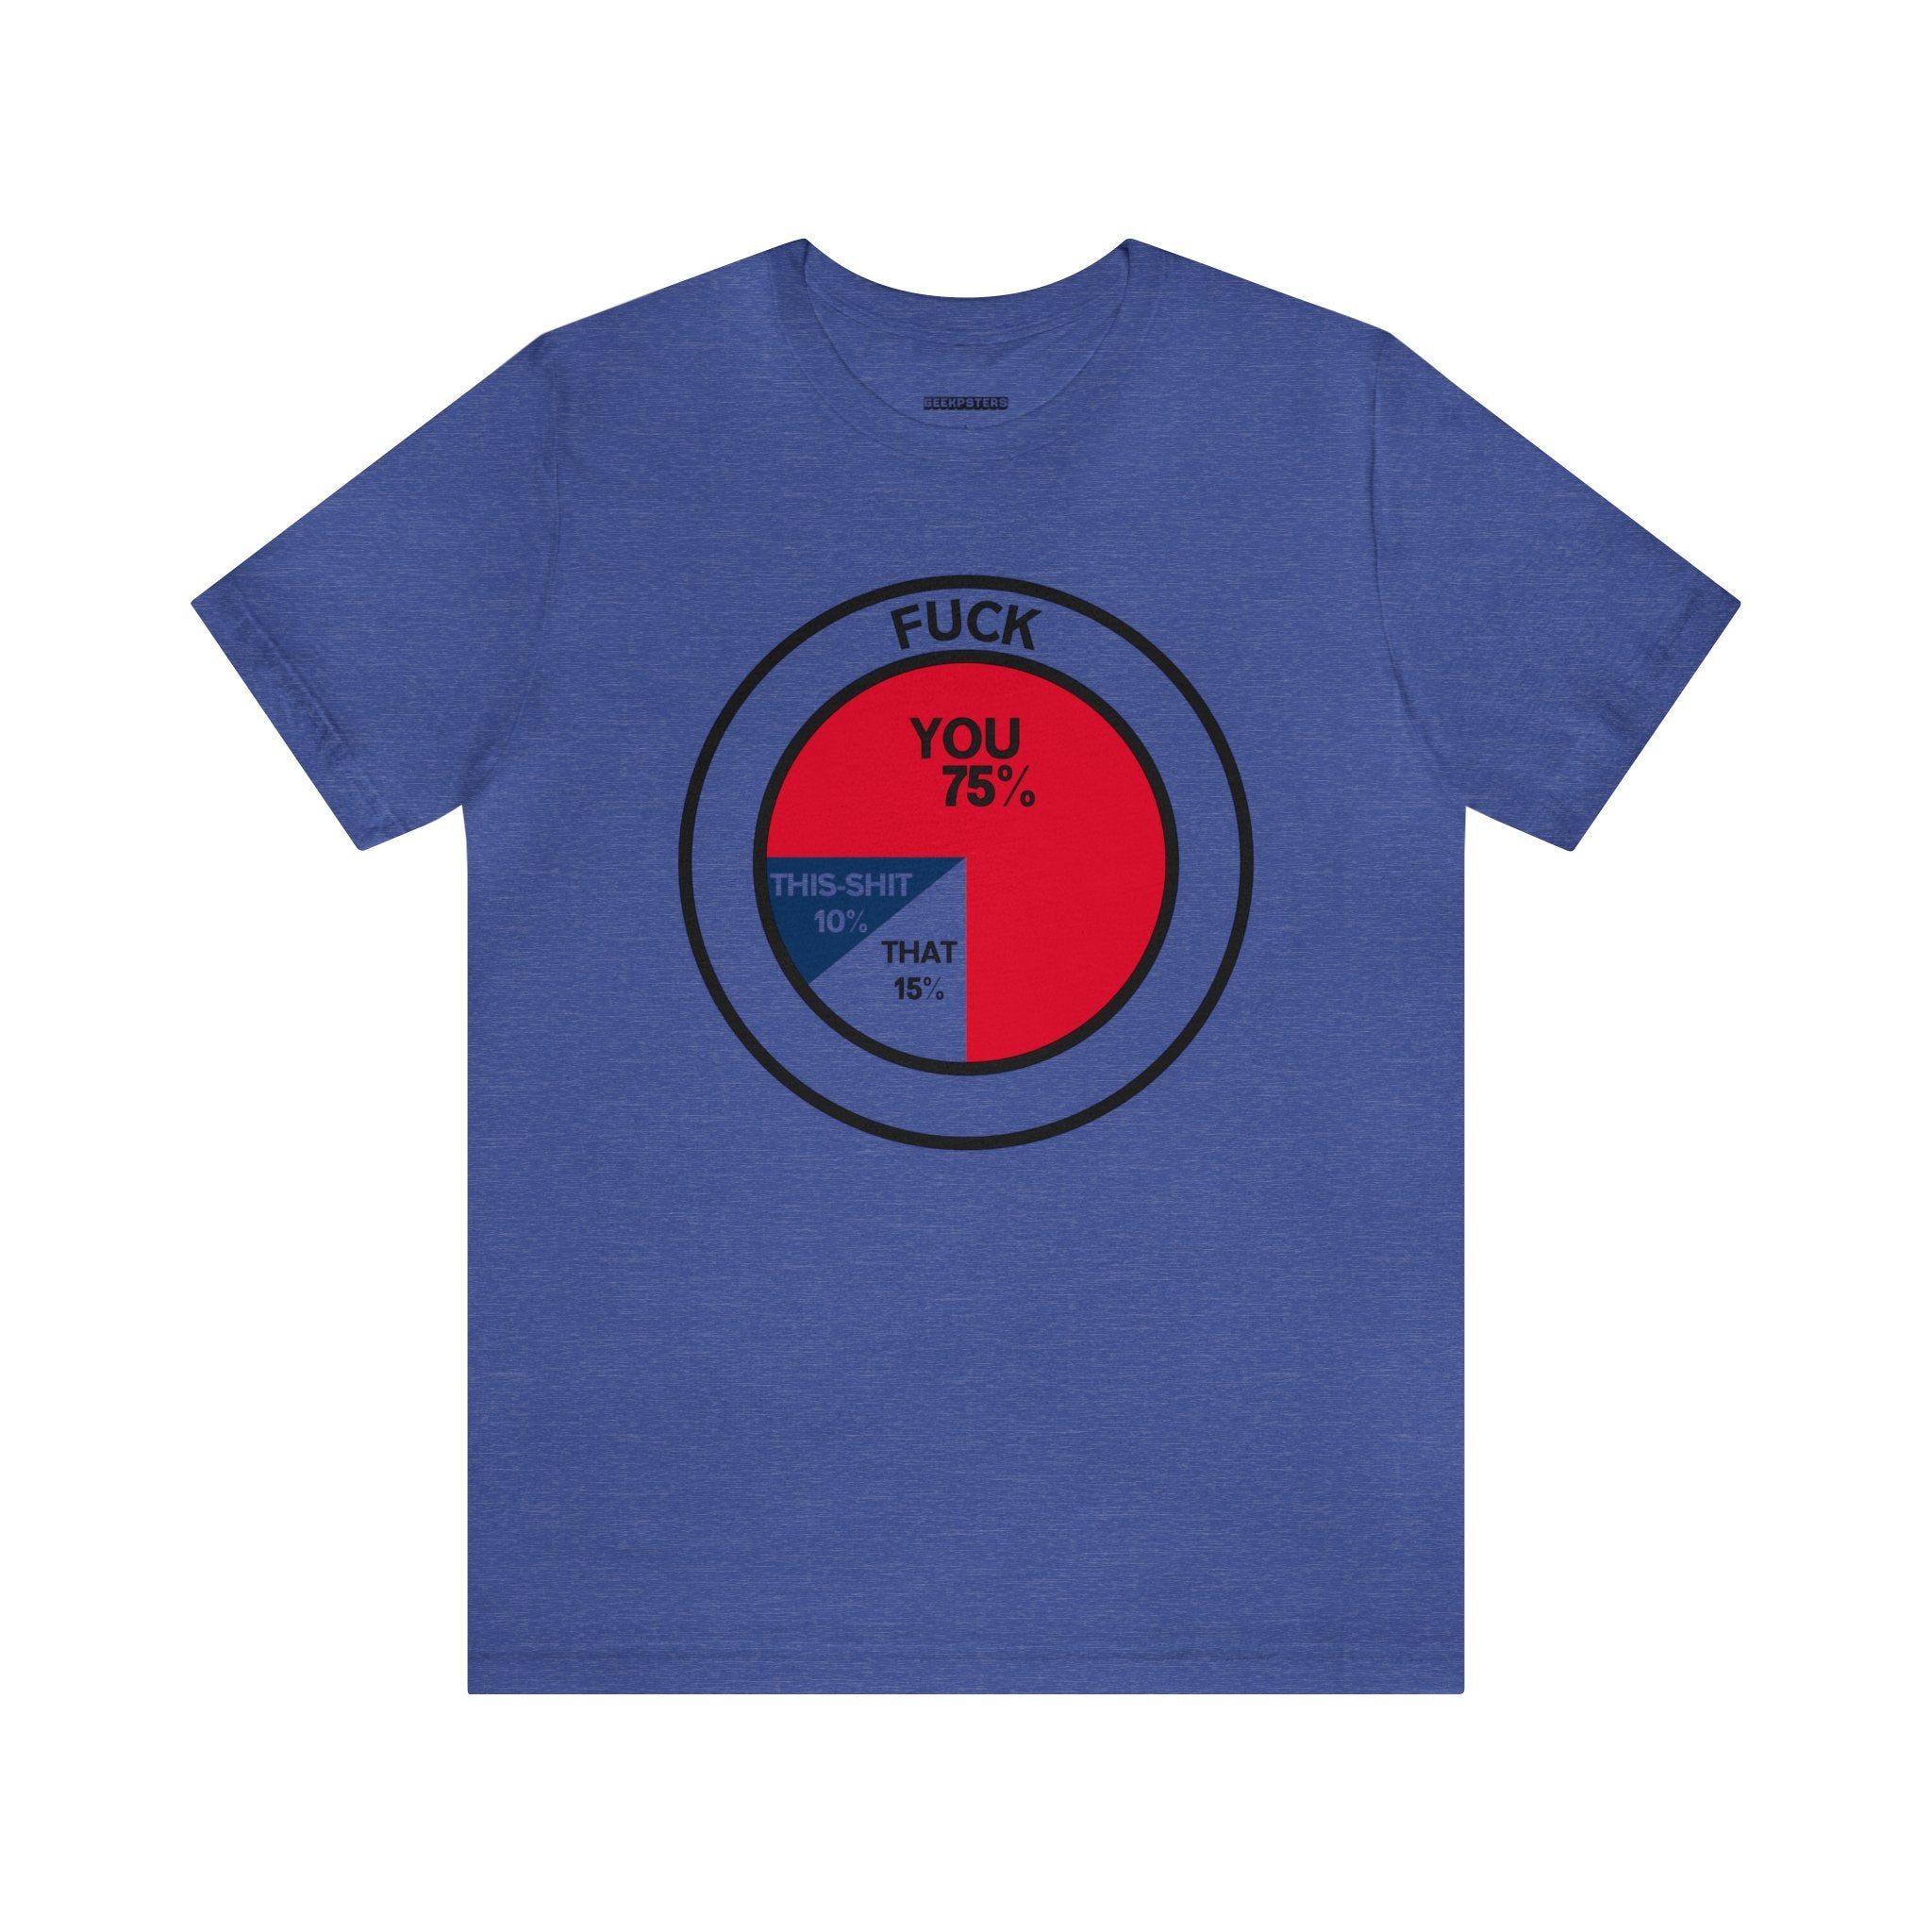 Today, you can order a True Statistic T-Shirt with a red and blue circle on it.